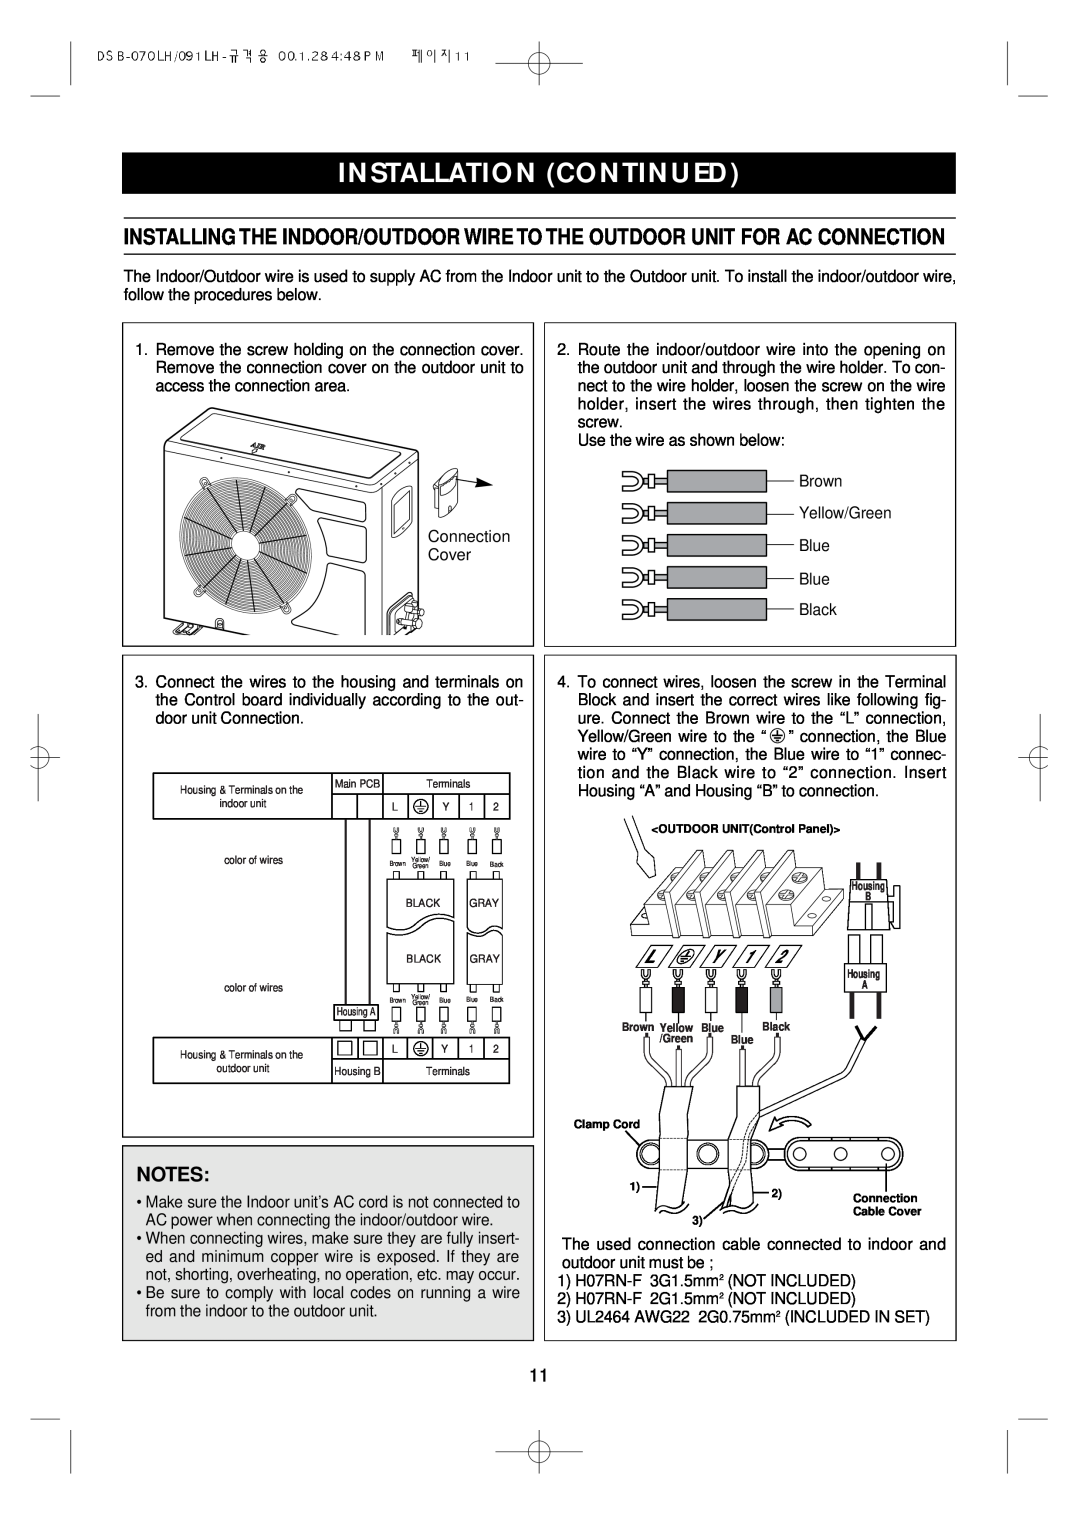 Daewoo DSB-071LH, Split Airconditioning System owner manual Installation Continued, Notes 